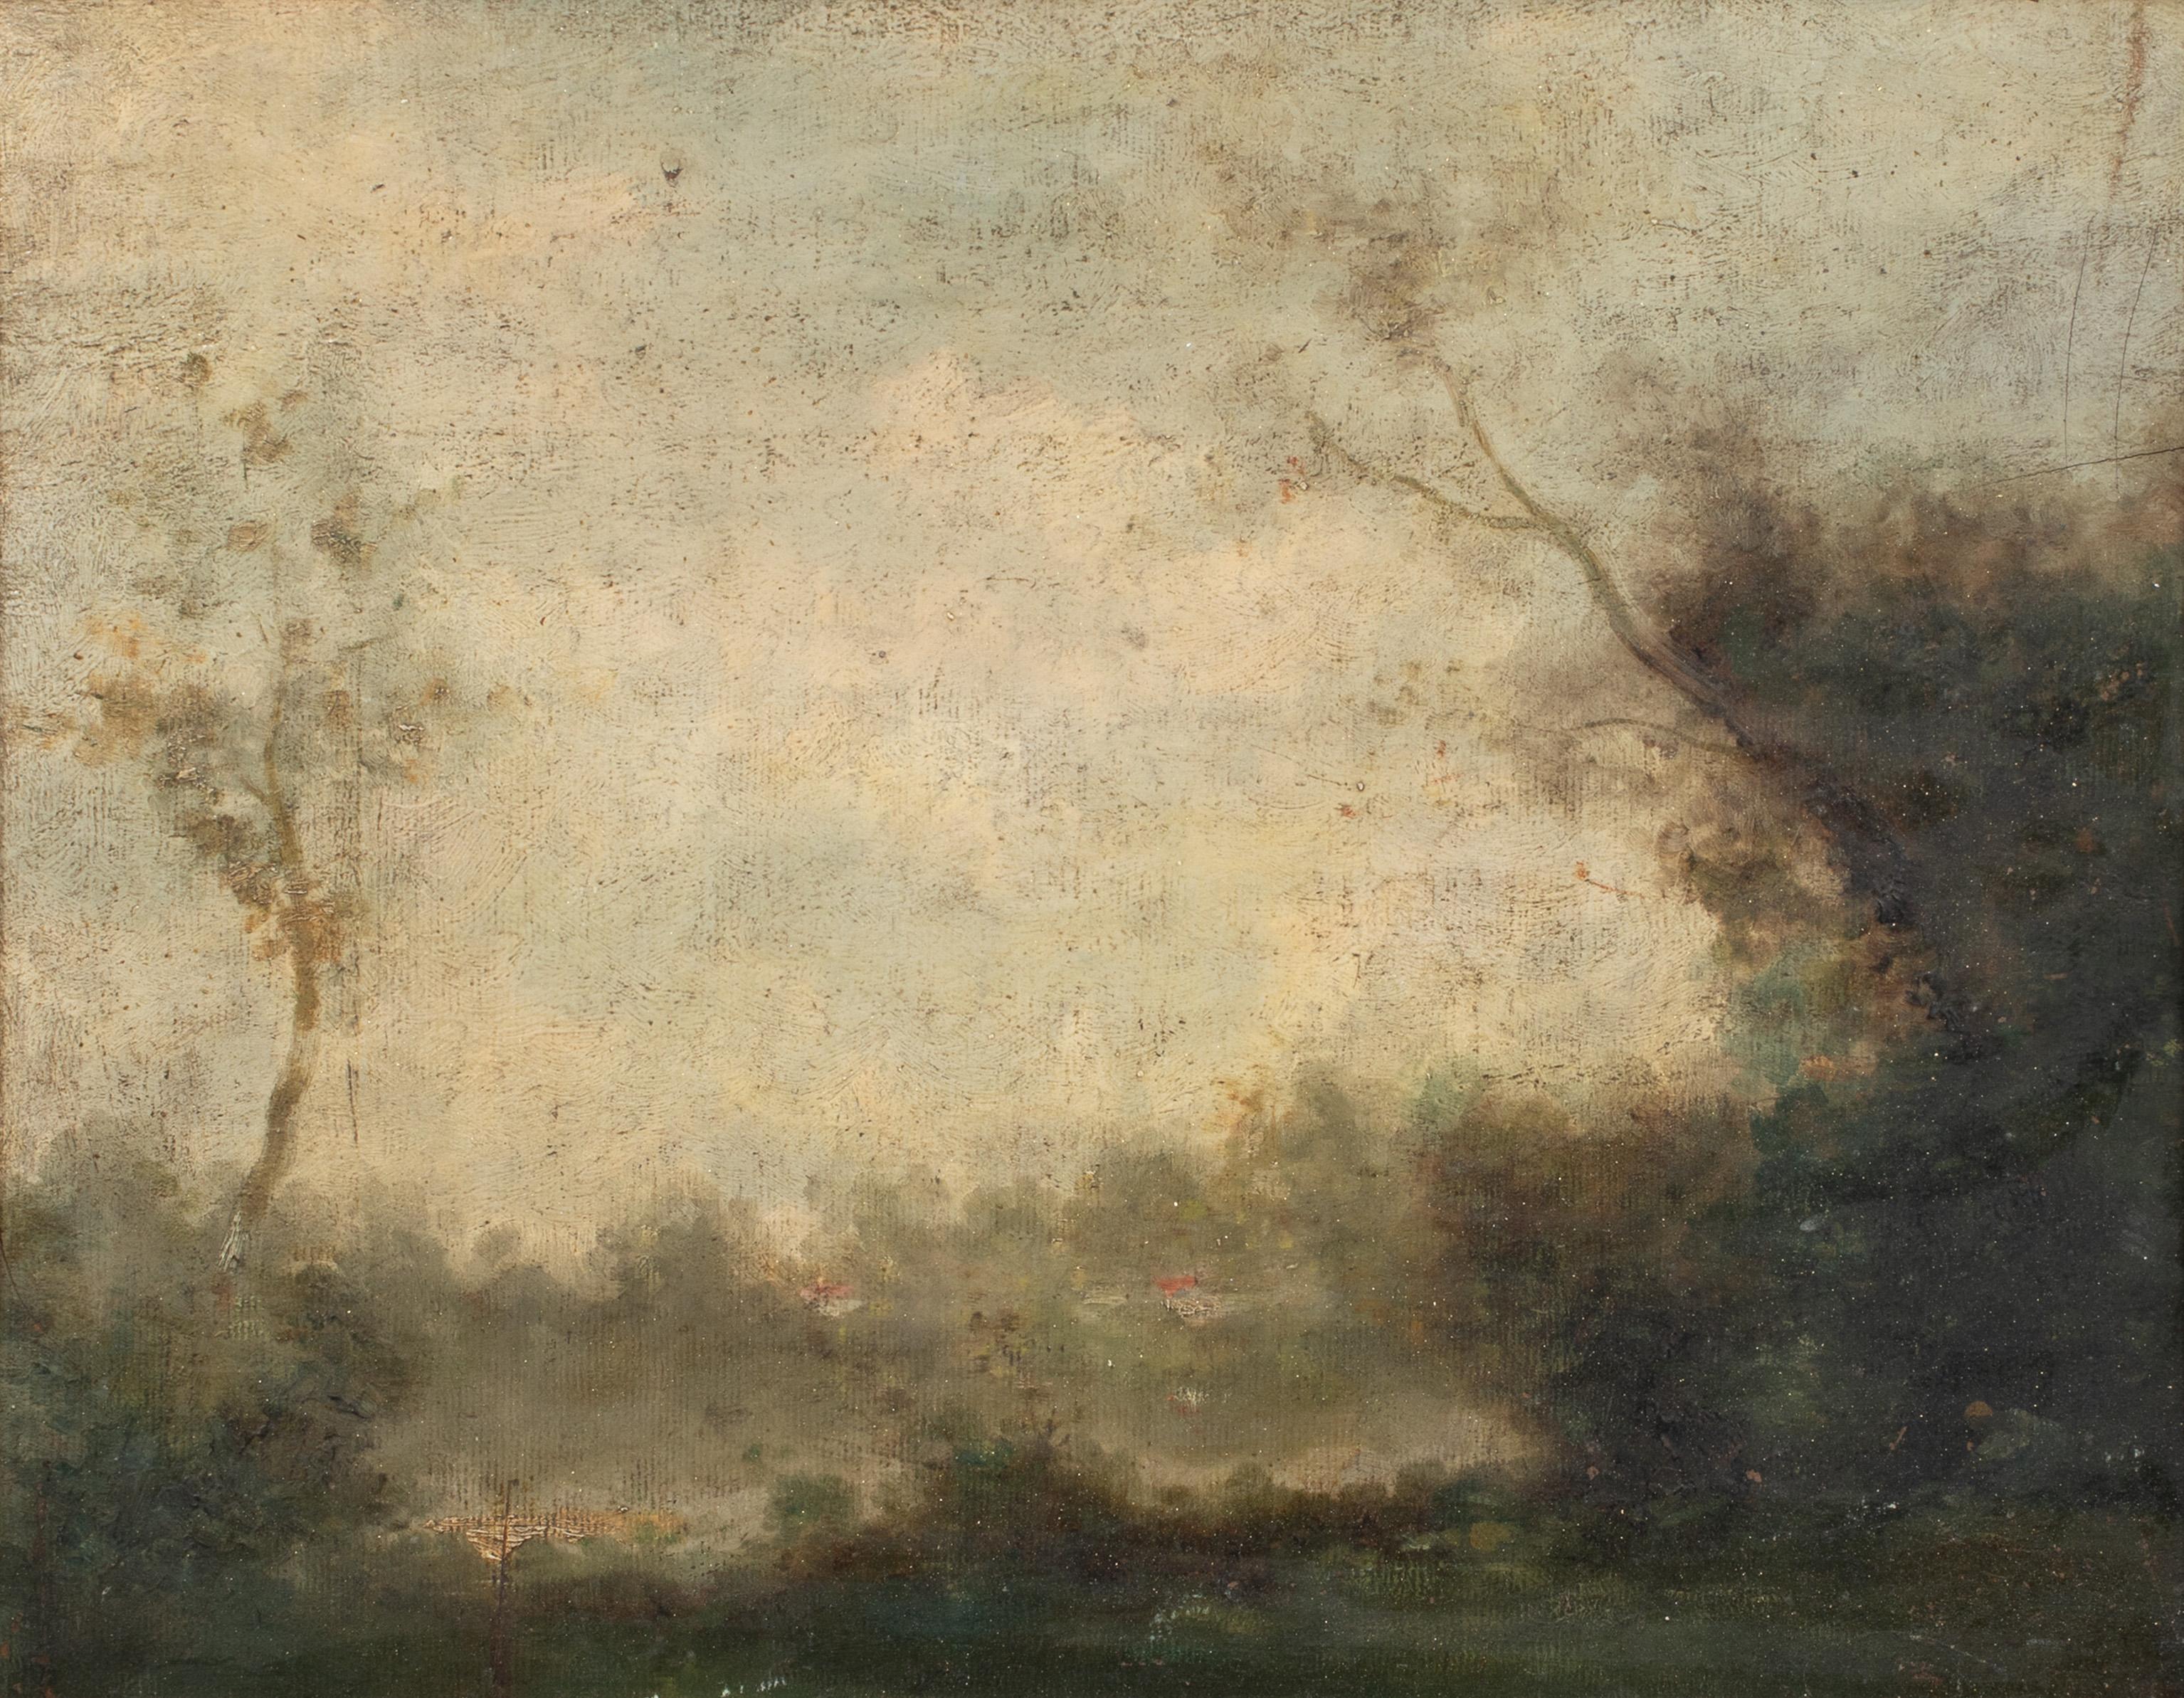 Landscape, 19th Century - Painting by Jean-Baptiste-Camille Corot